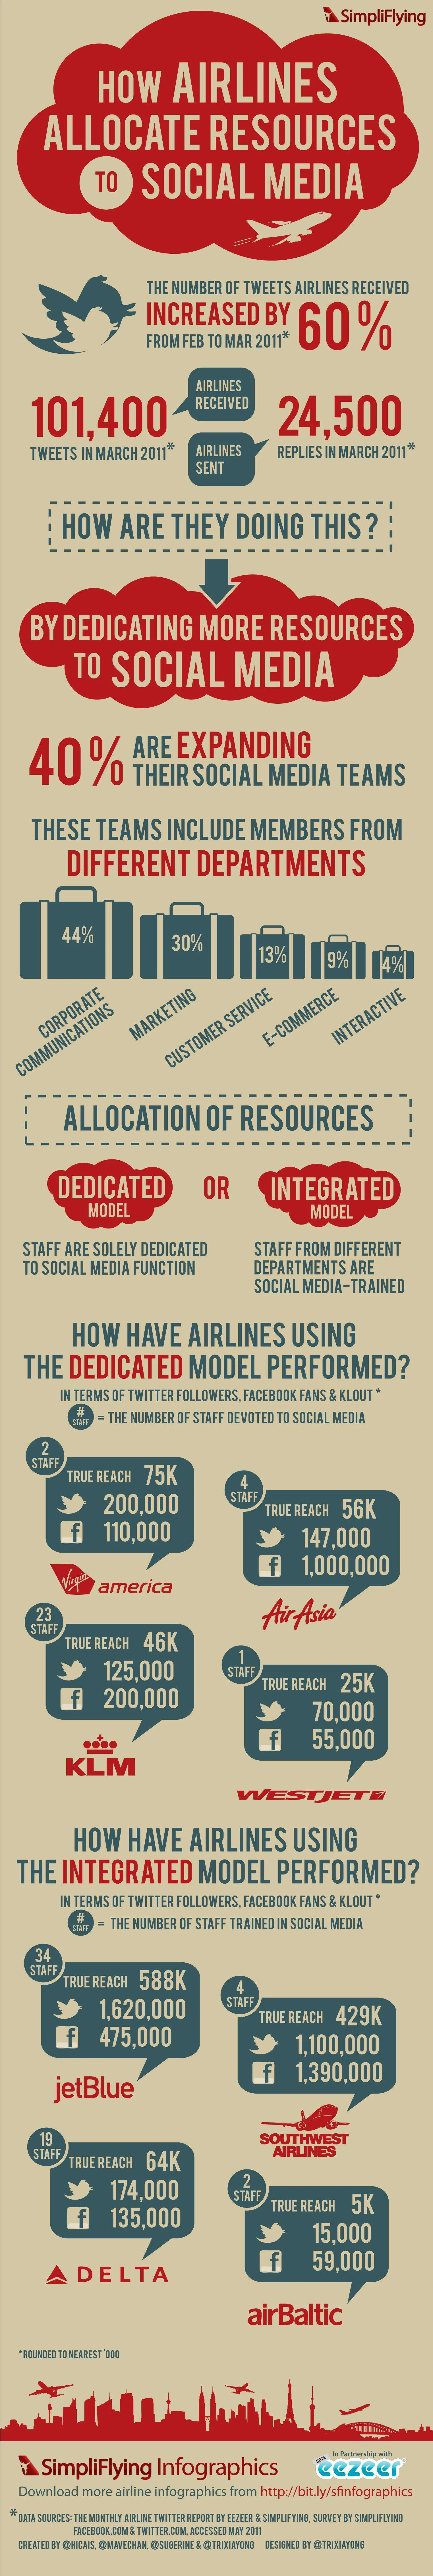 Airlines-and-social-media-infographics